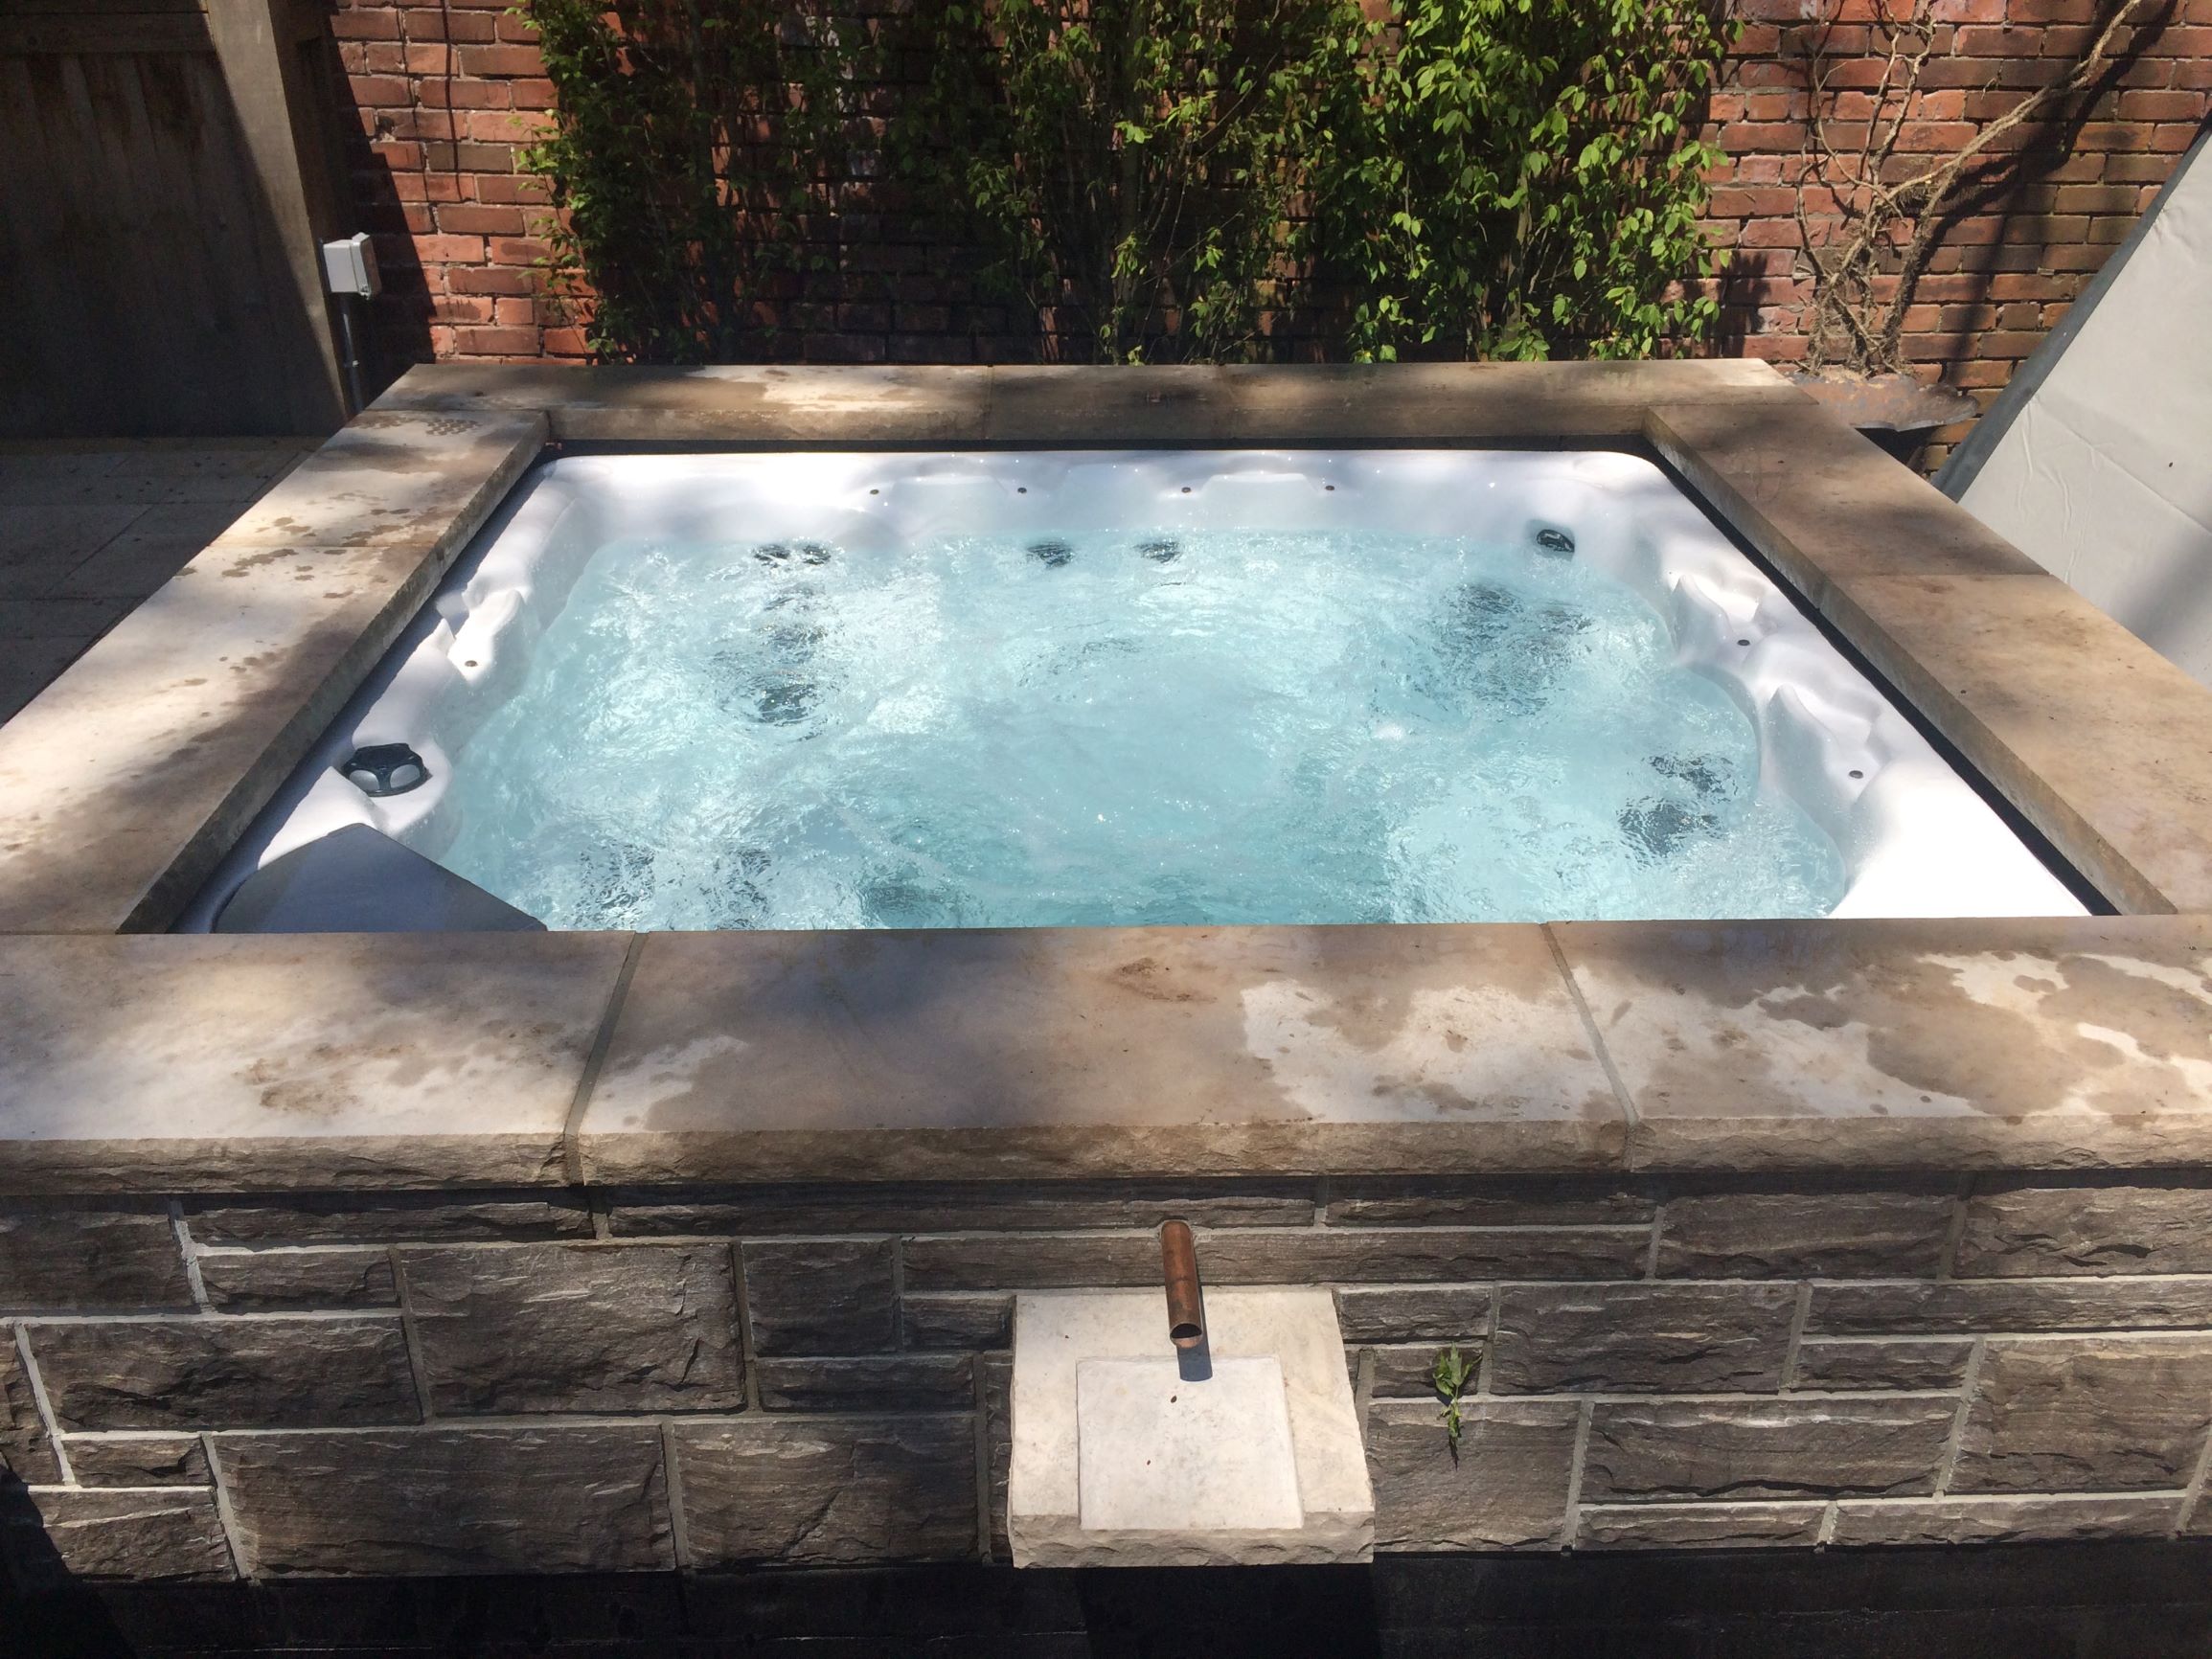 Oily Film in Hot Tub? Causes and Treatments